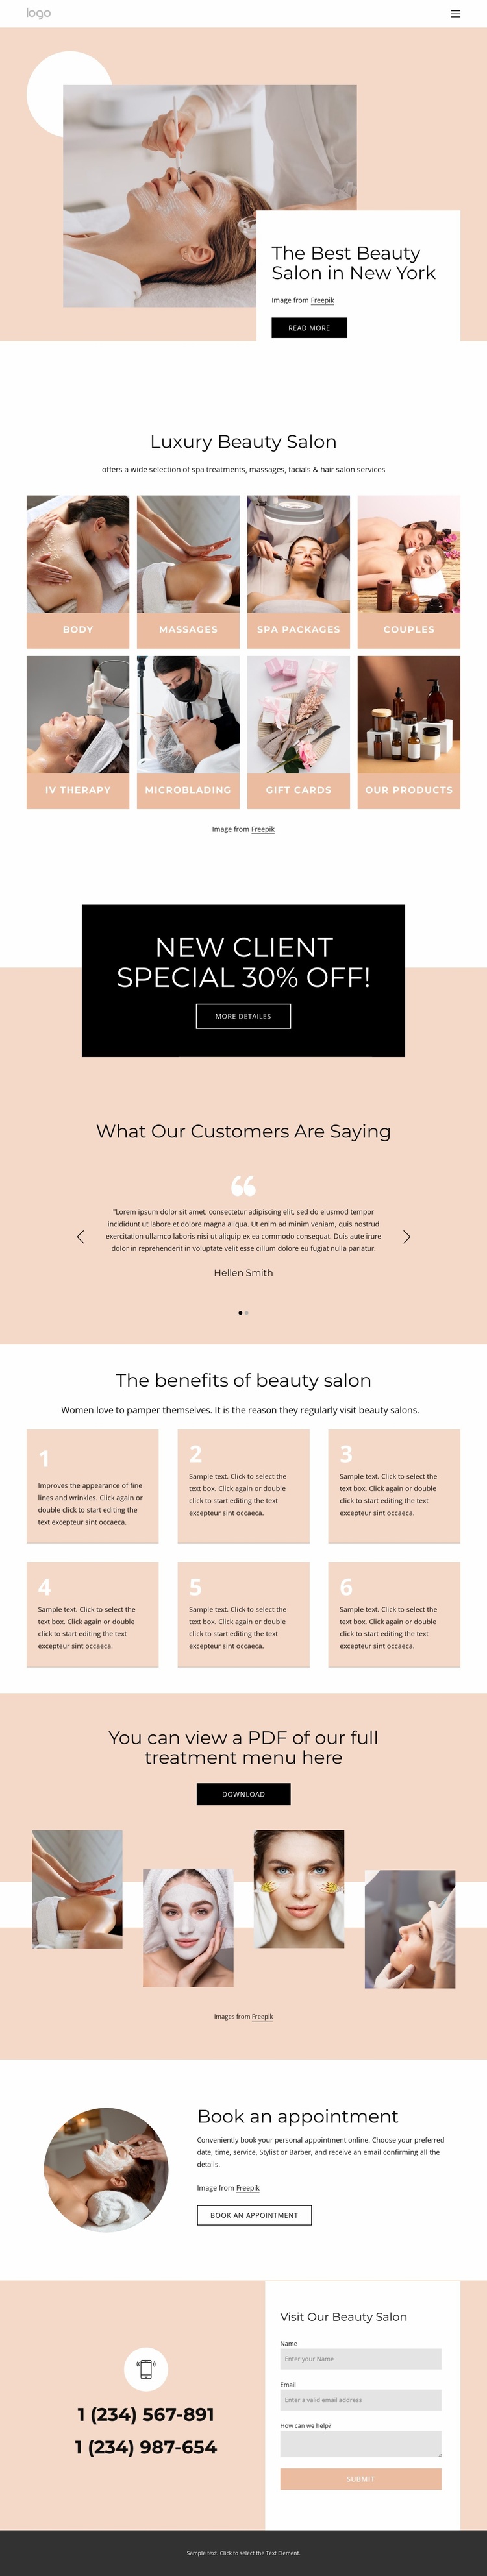 The best beauty salon in NYC Landing Page